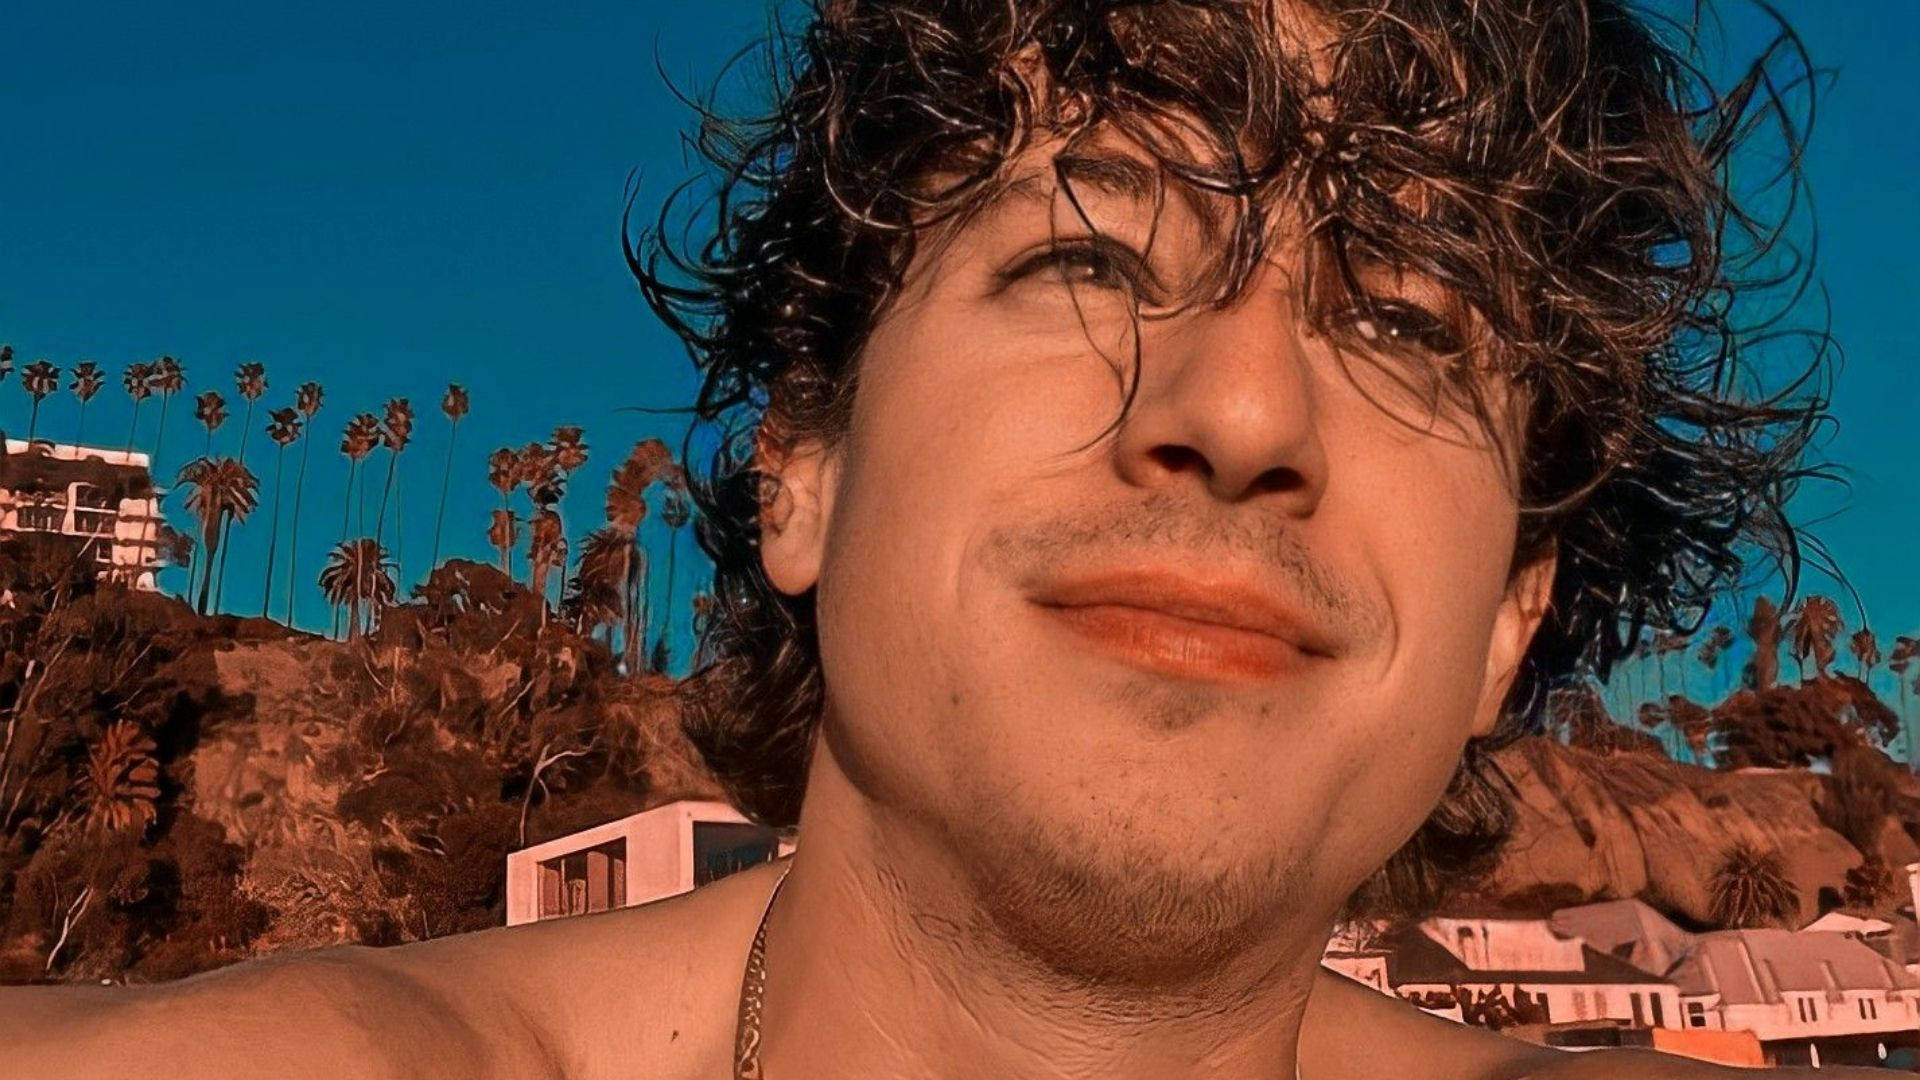 Download Charlie Puth On The Beach Wallpaper 